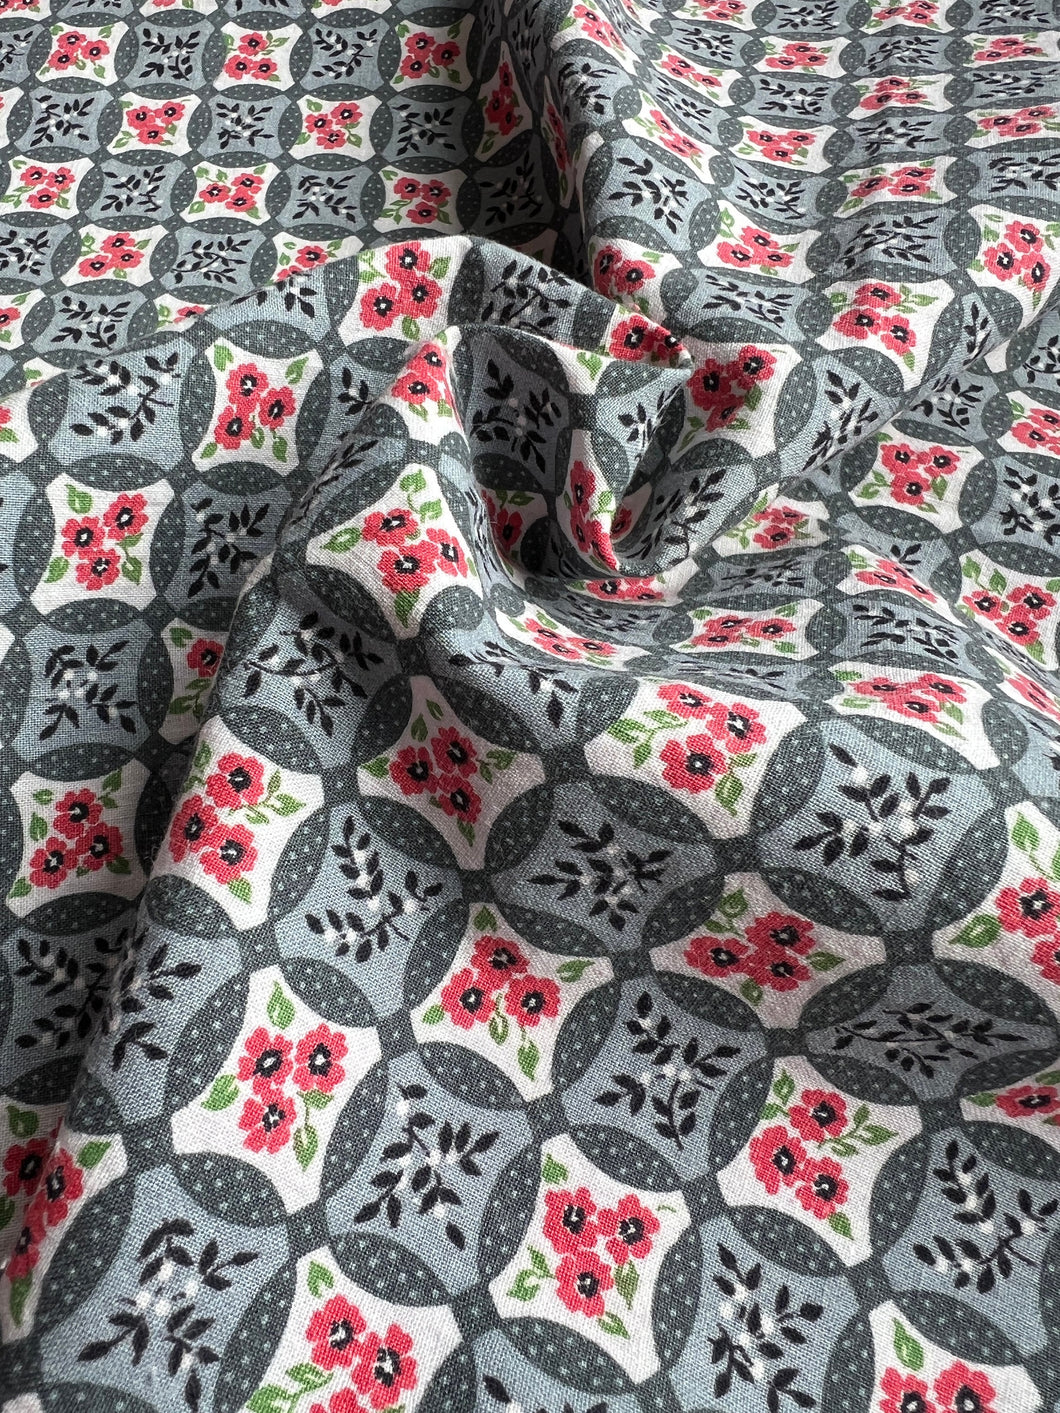 Vintage Grey and Pink Printed Floral - By the Piece - Grey and Pink 100% Cotton Floral Fabric